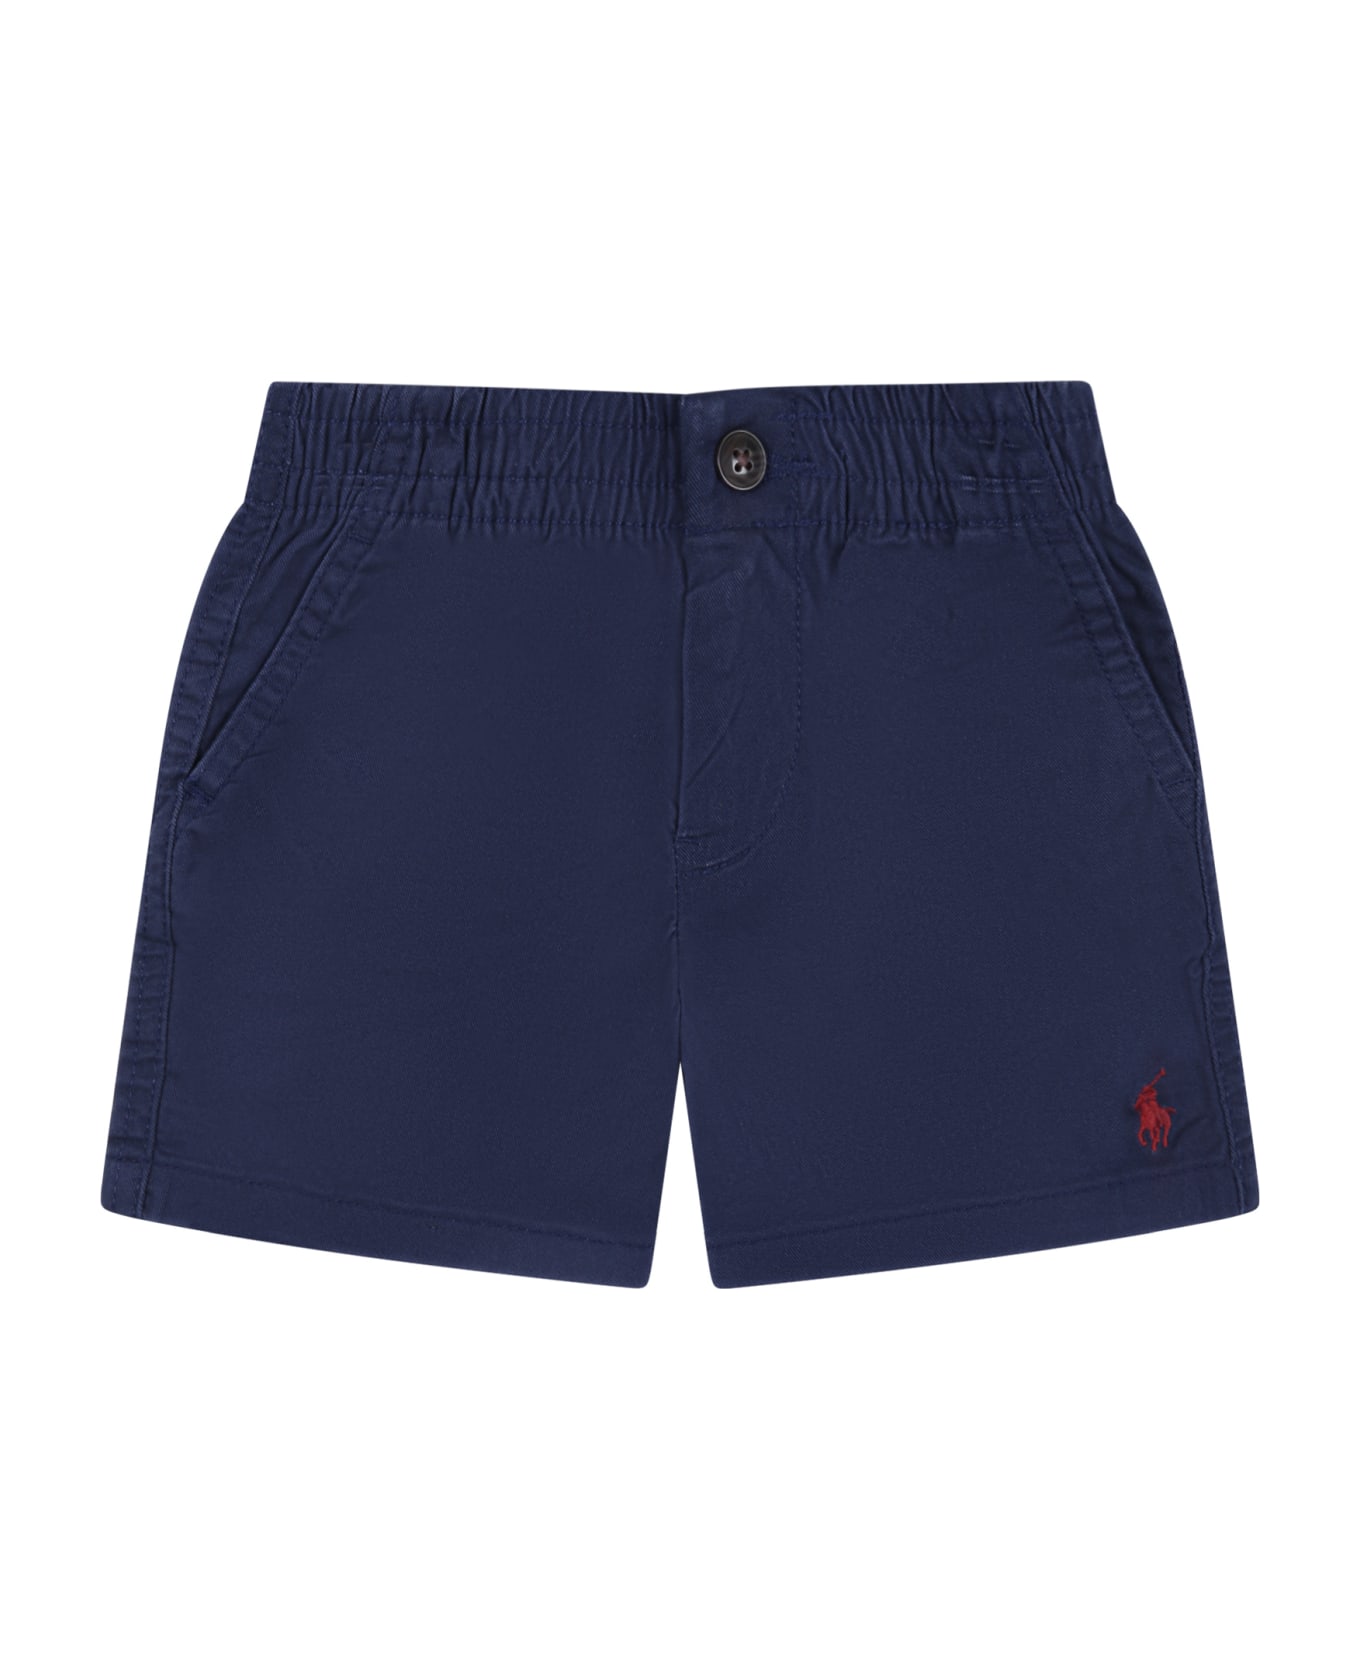 Ralph Lauren Blue Shorts For Baby Boy With Red Pony - Blue